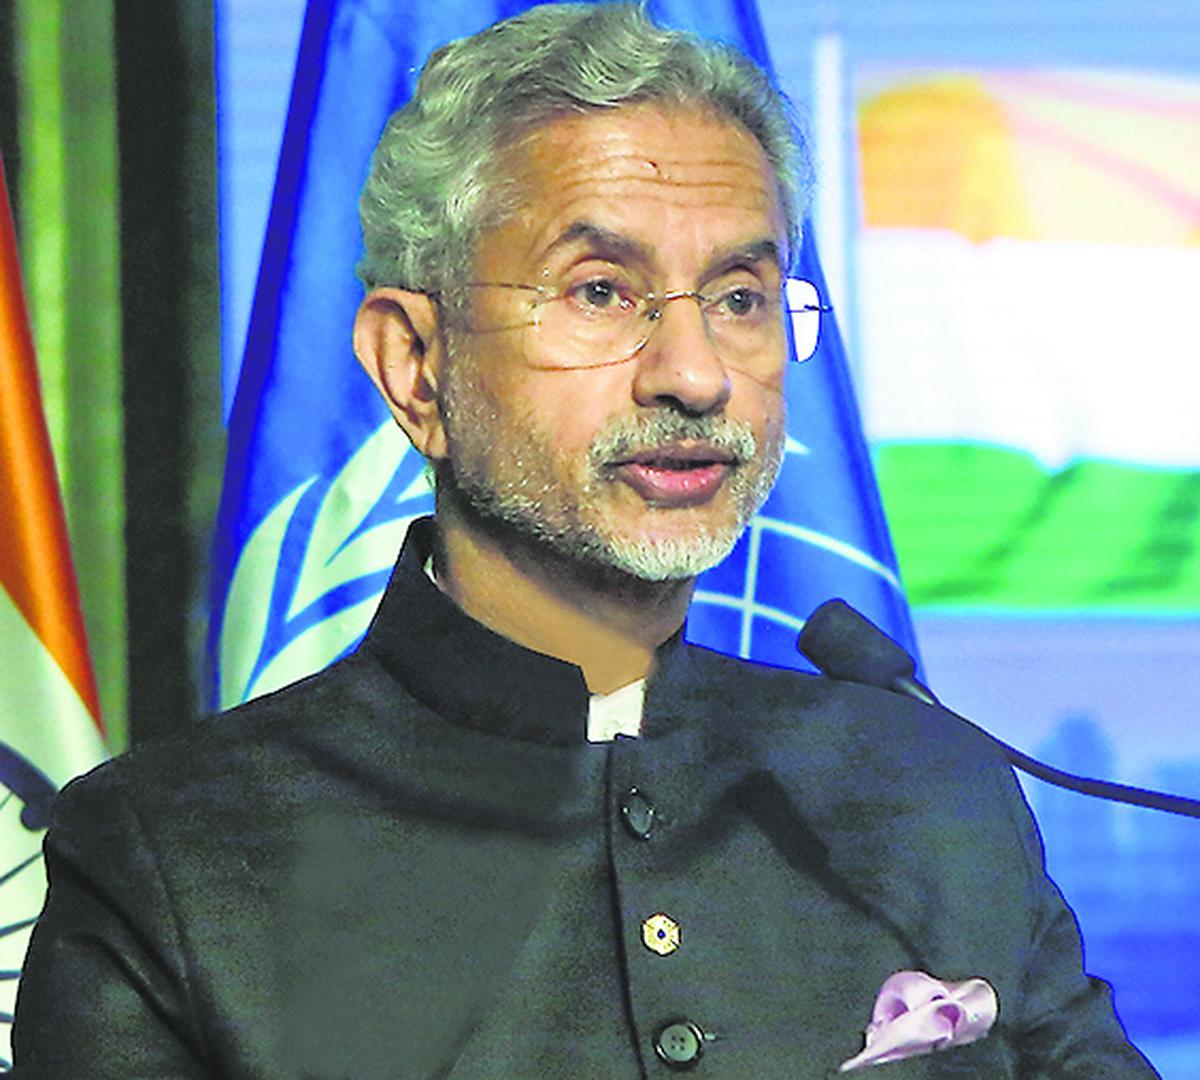 India mostly used force defensively when threatened, almost always within its own borders: Jaishankar